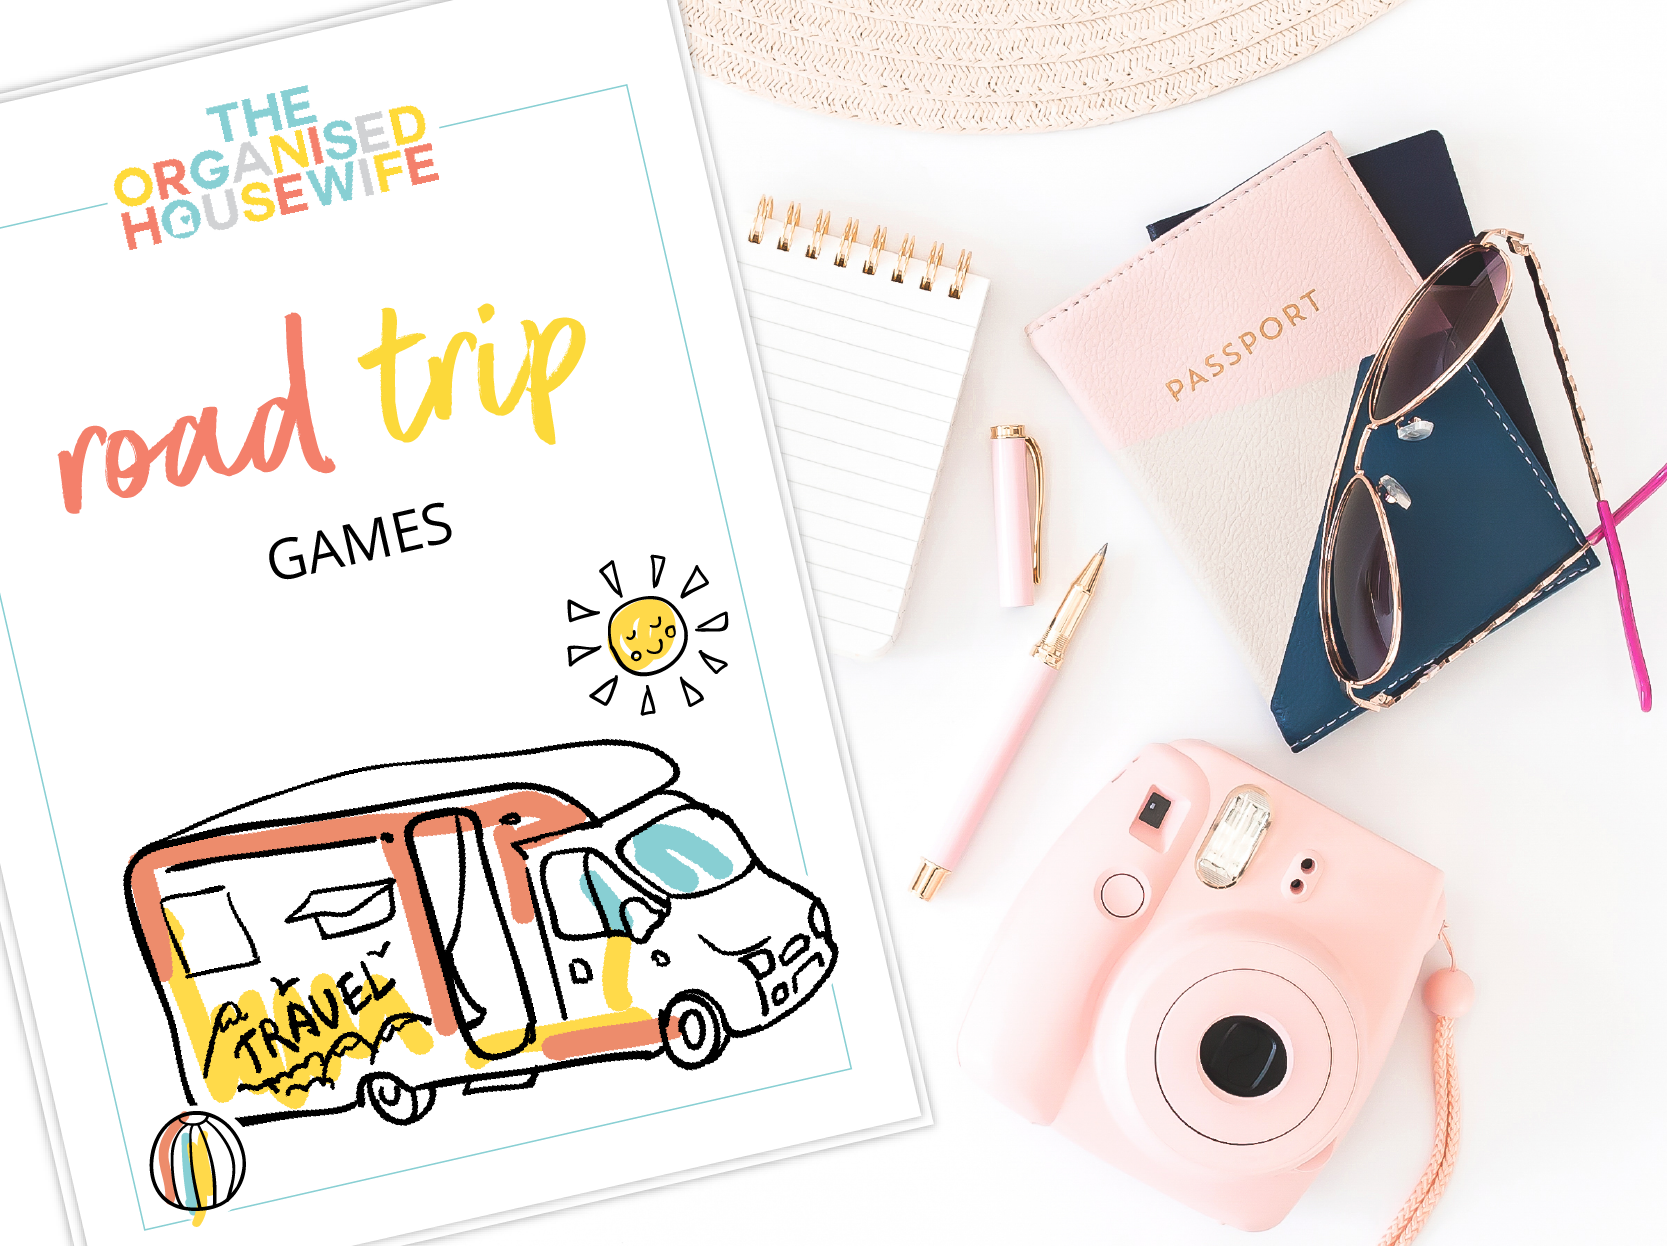 Aussie road trip game printable to keep kids entertained on car trips